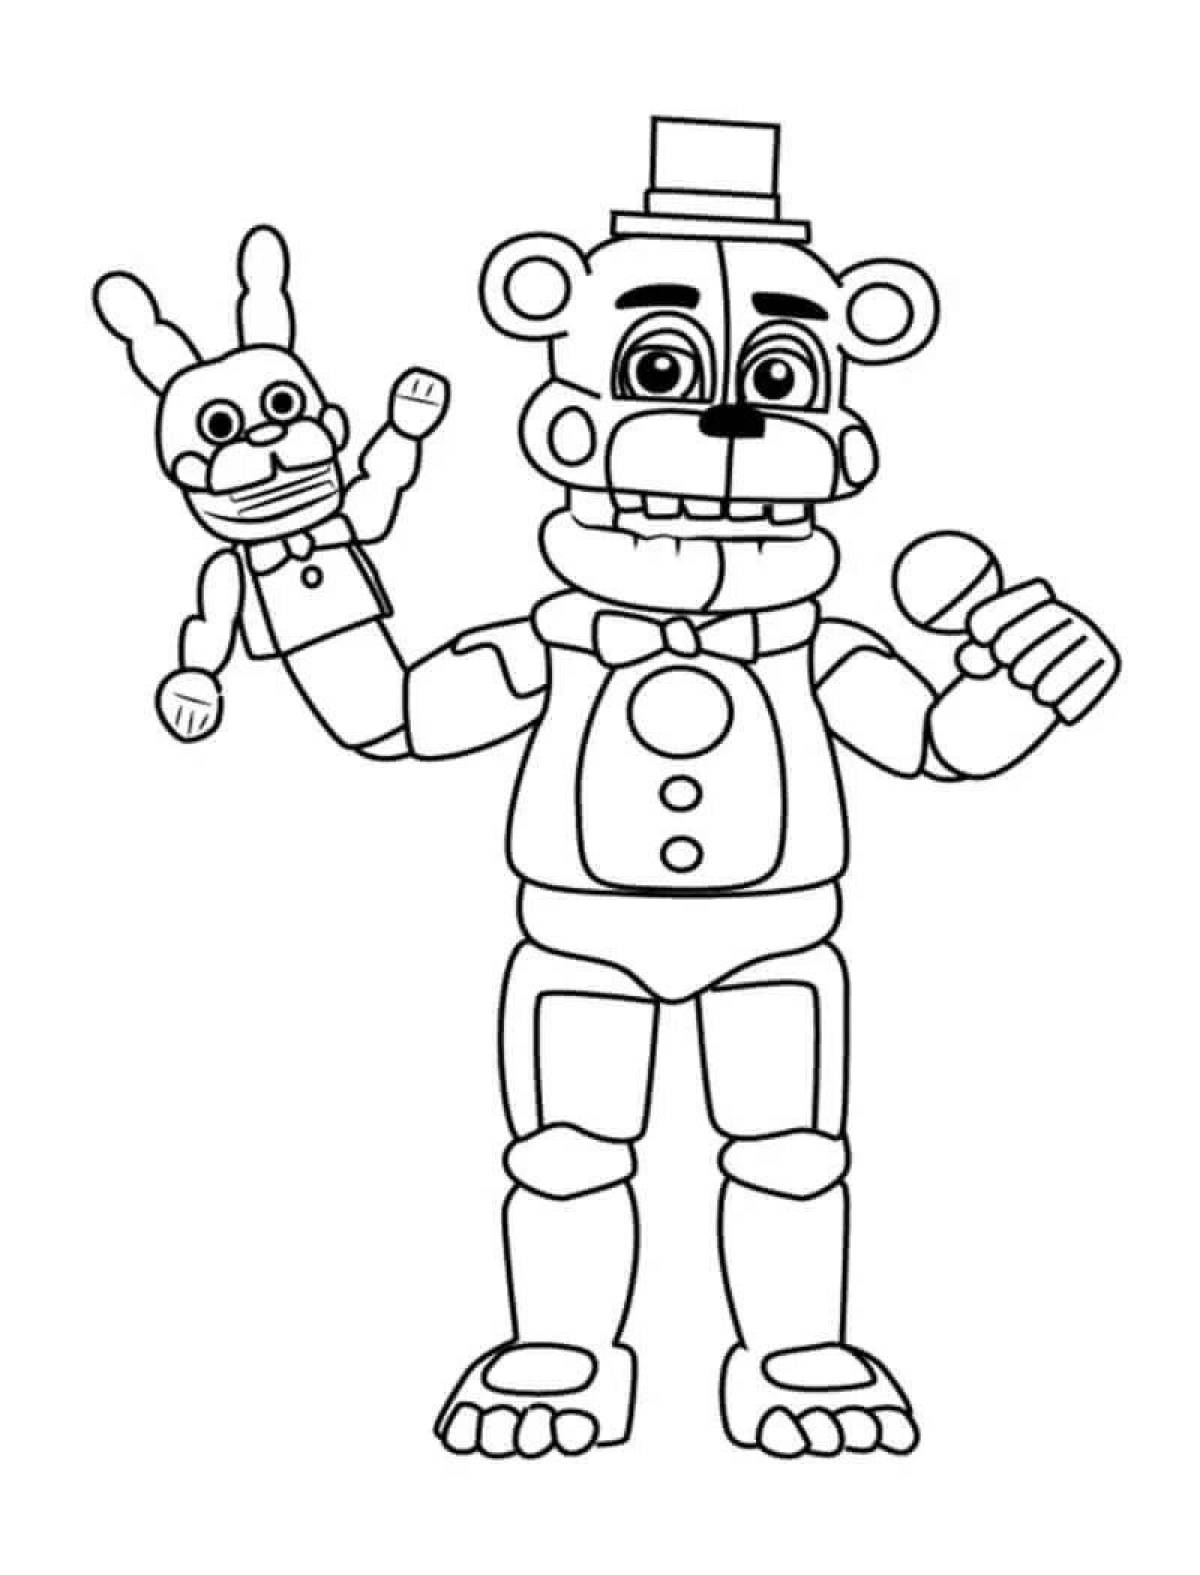 Fun official fnaf coloring page